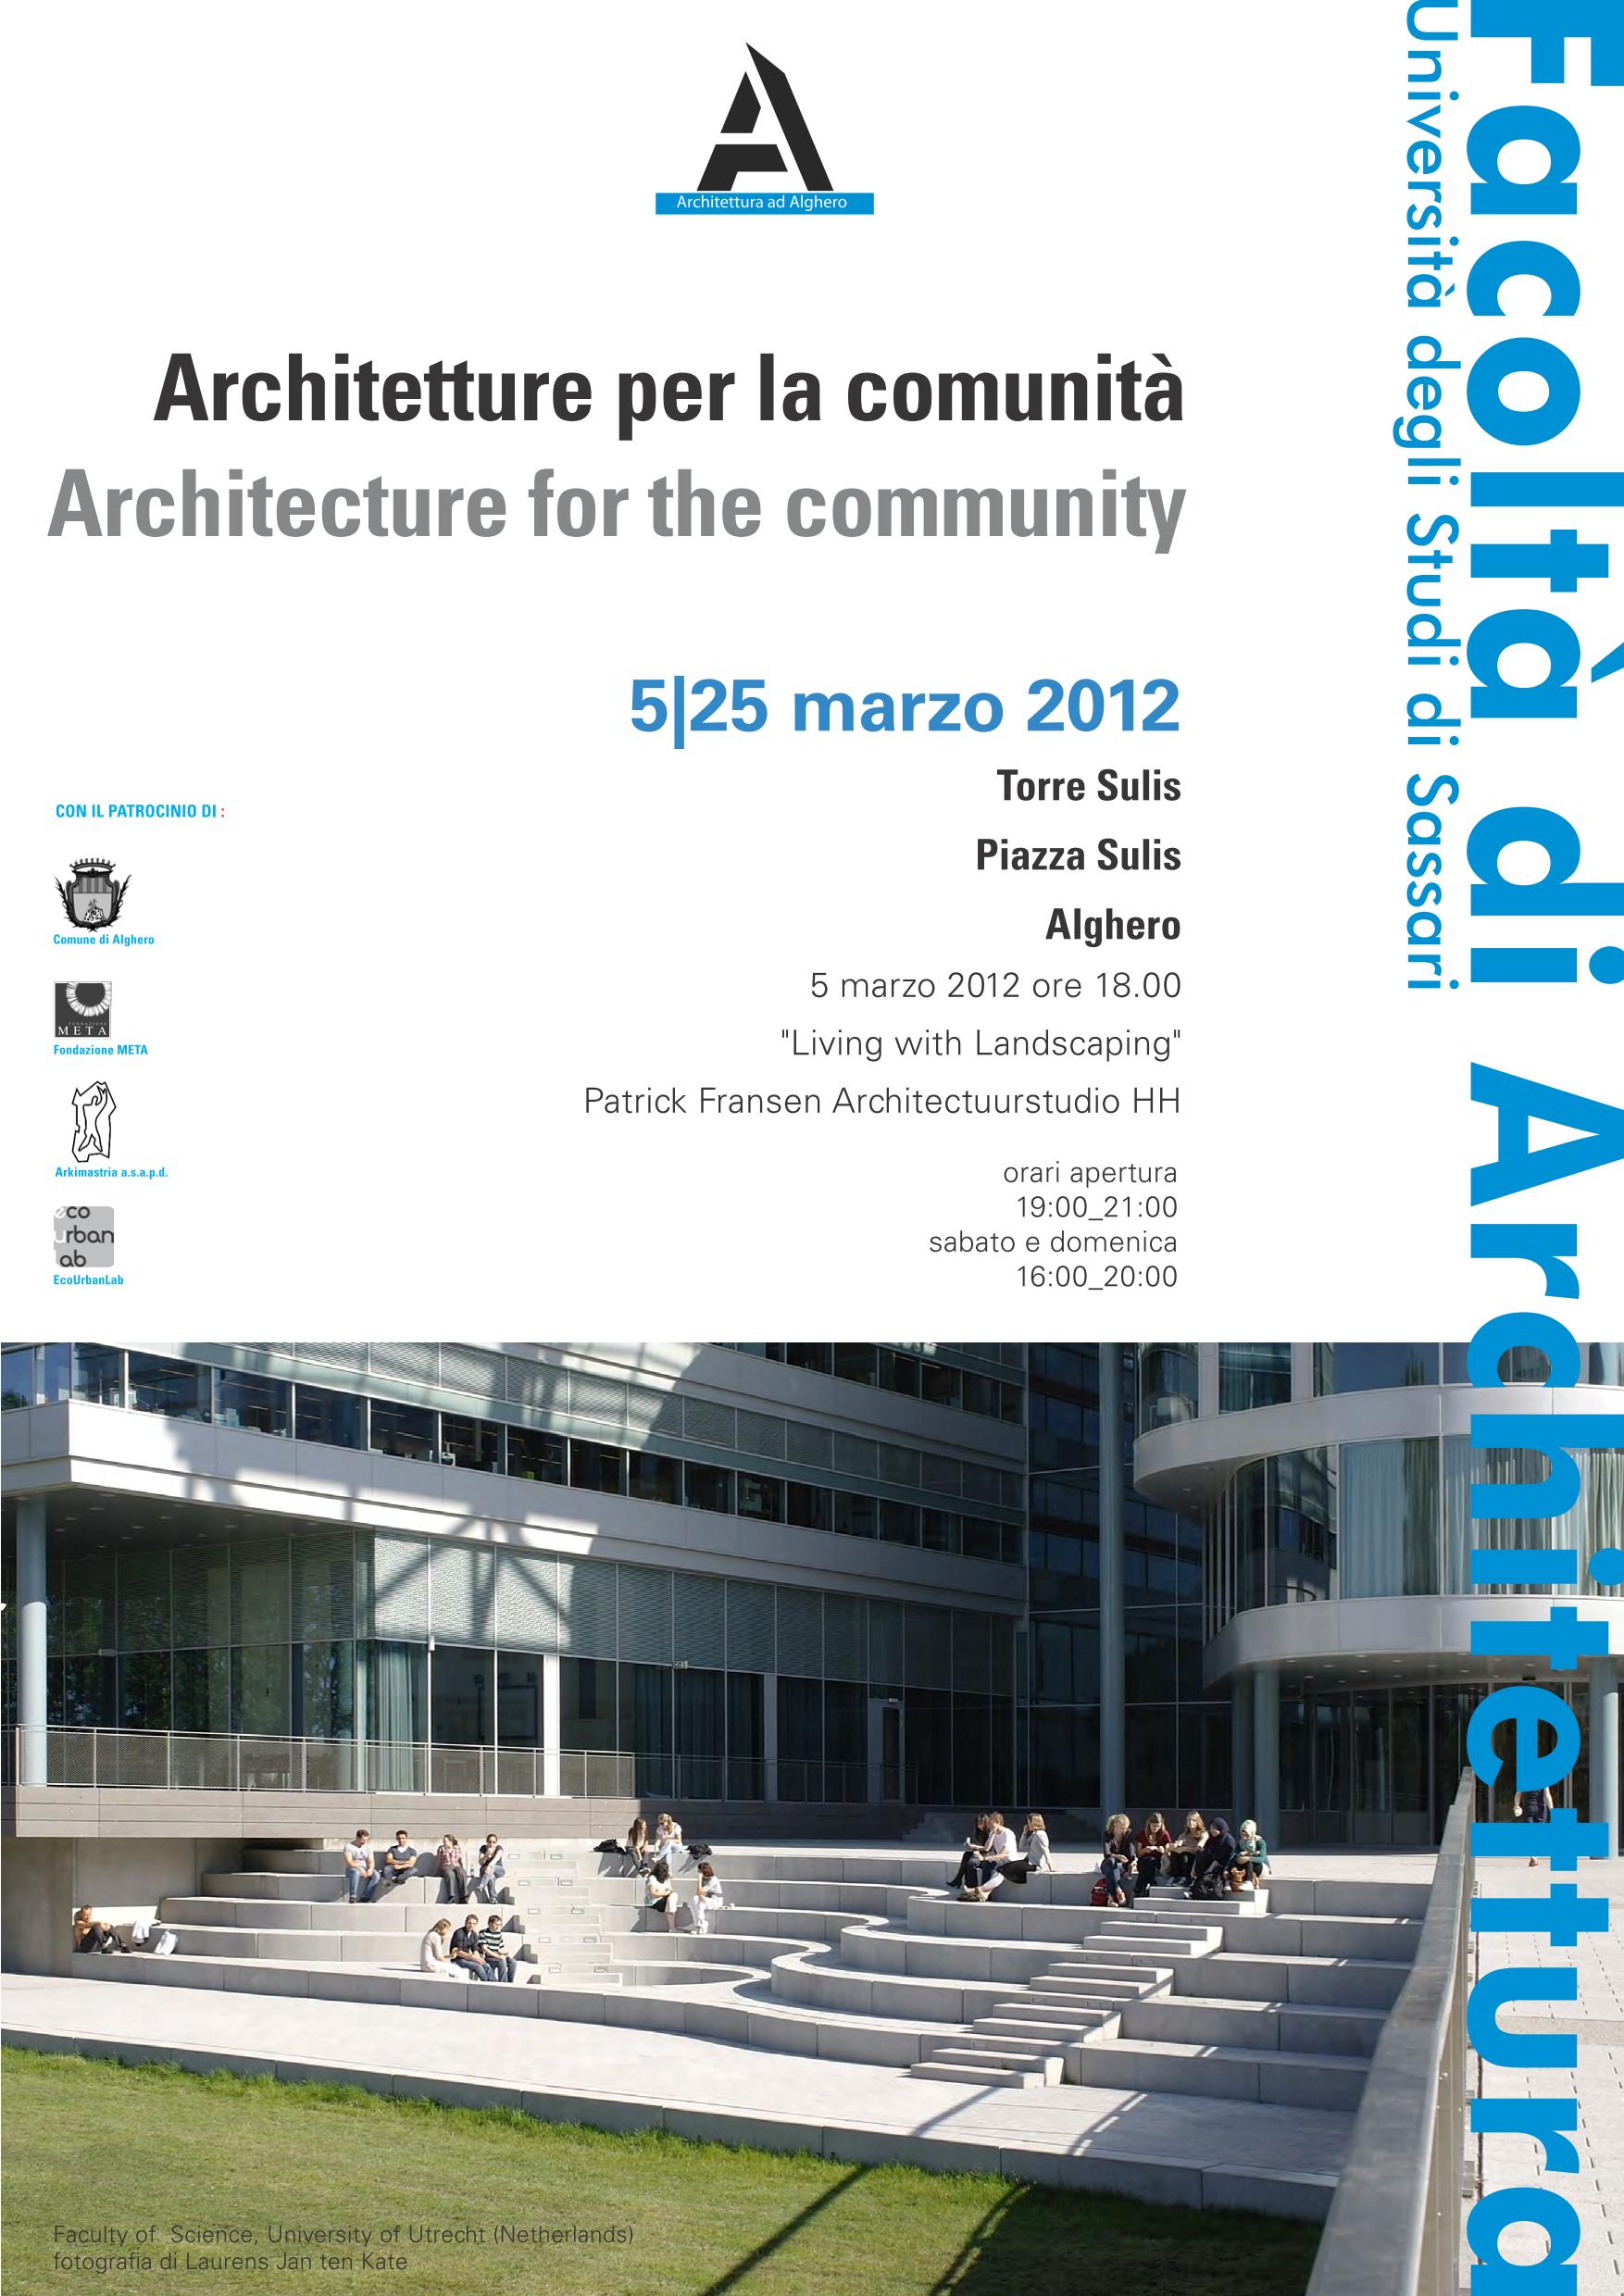 Architecture for the community